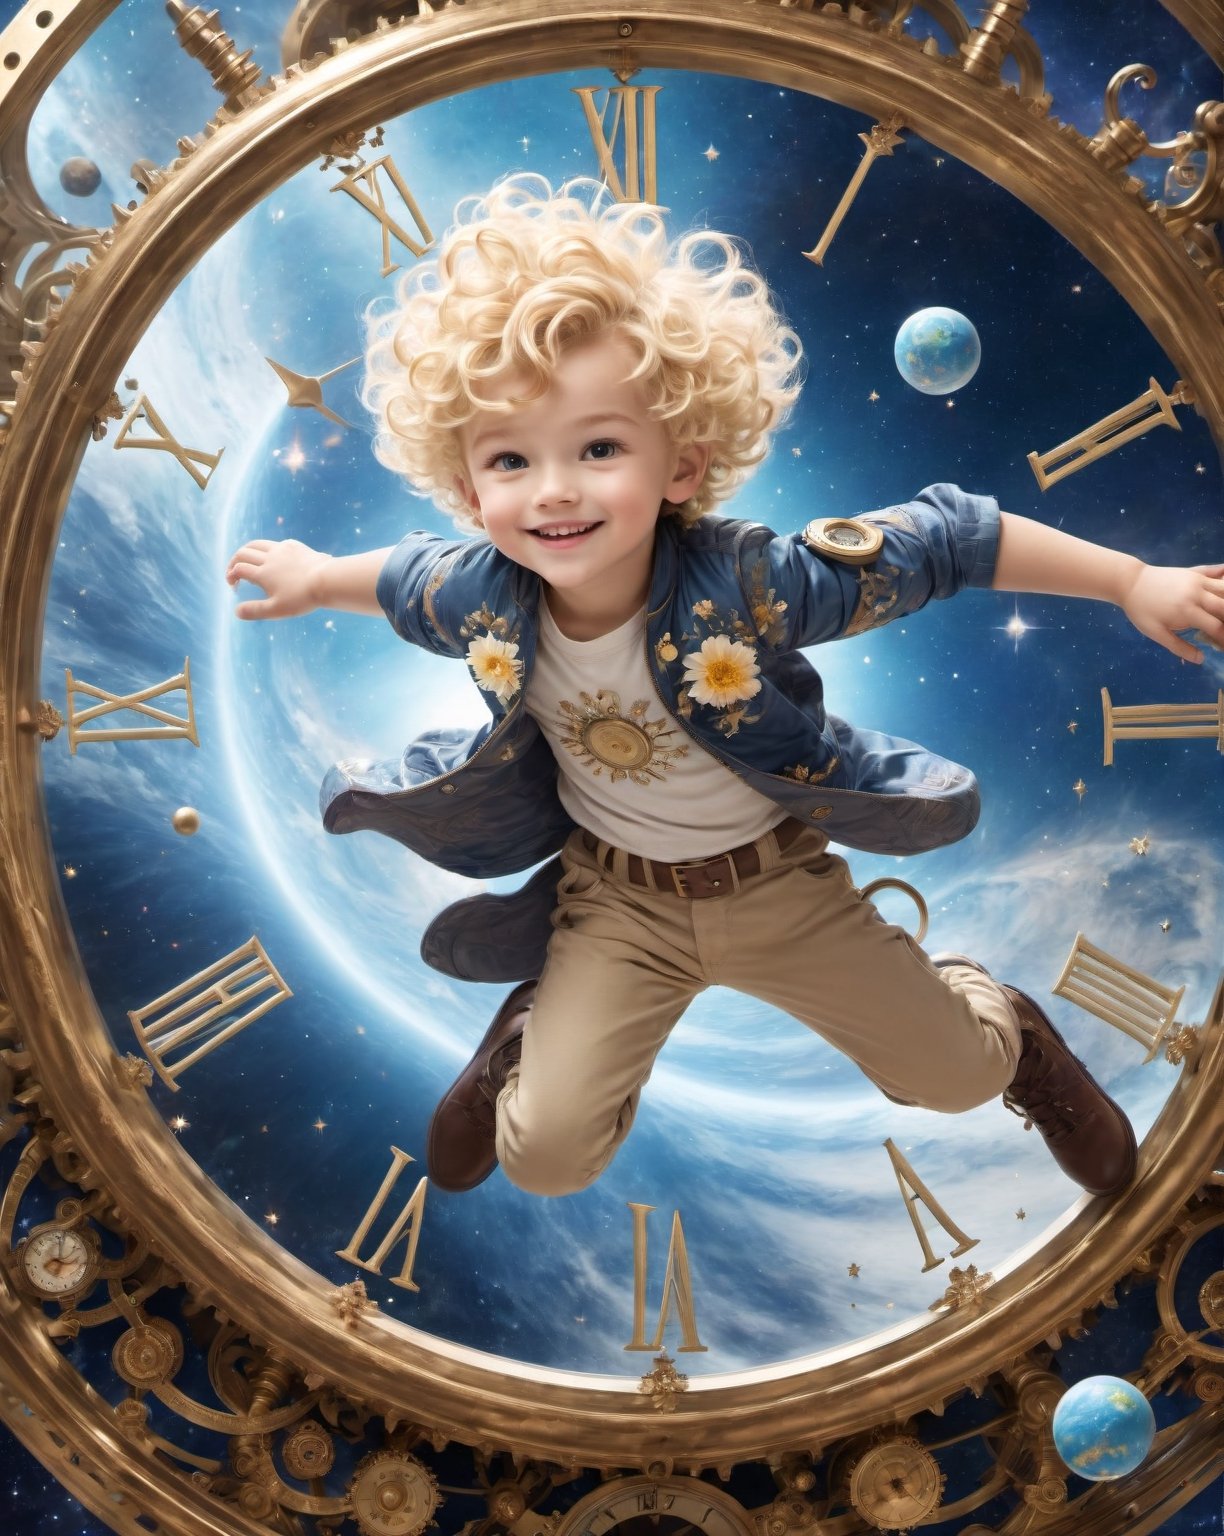  blond curly little boy flying  in atomic space,cute smile,physics, perfect hands,five fingers hands,dream ,clock dial ,floral pattern ,ruan jia, Adonna Khare, loundraw ,Mystic, futuristic universe background,planets,ray tracing,huayu,Movie Still